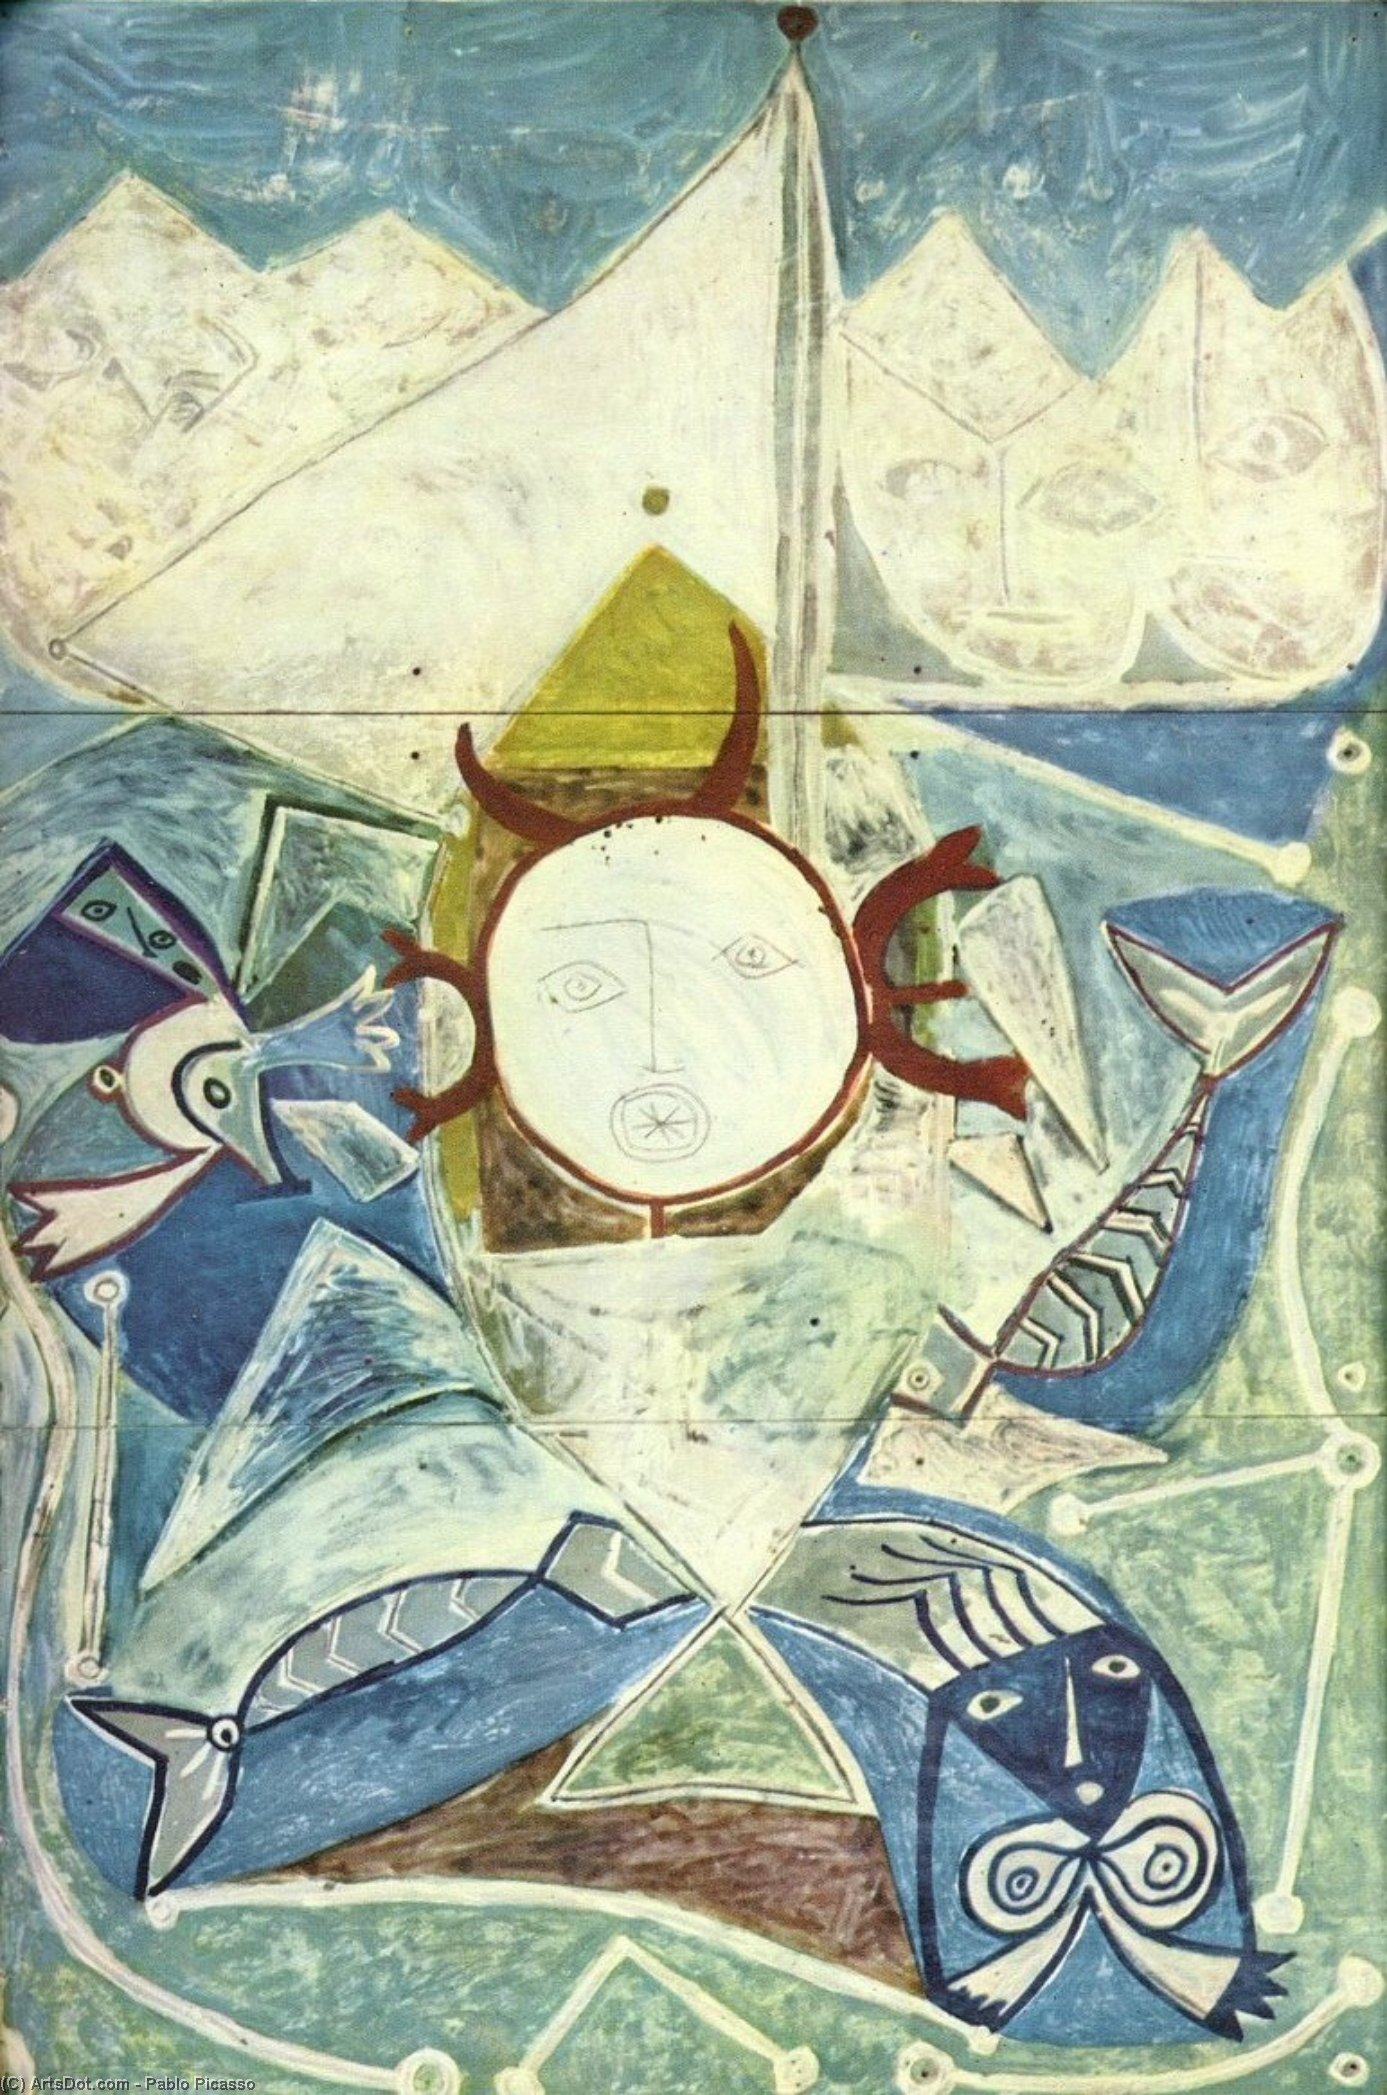 WikiOO.org - 백과 사전 - 회화, 삽화 Pablo Picasso - Ulysses and sirens